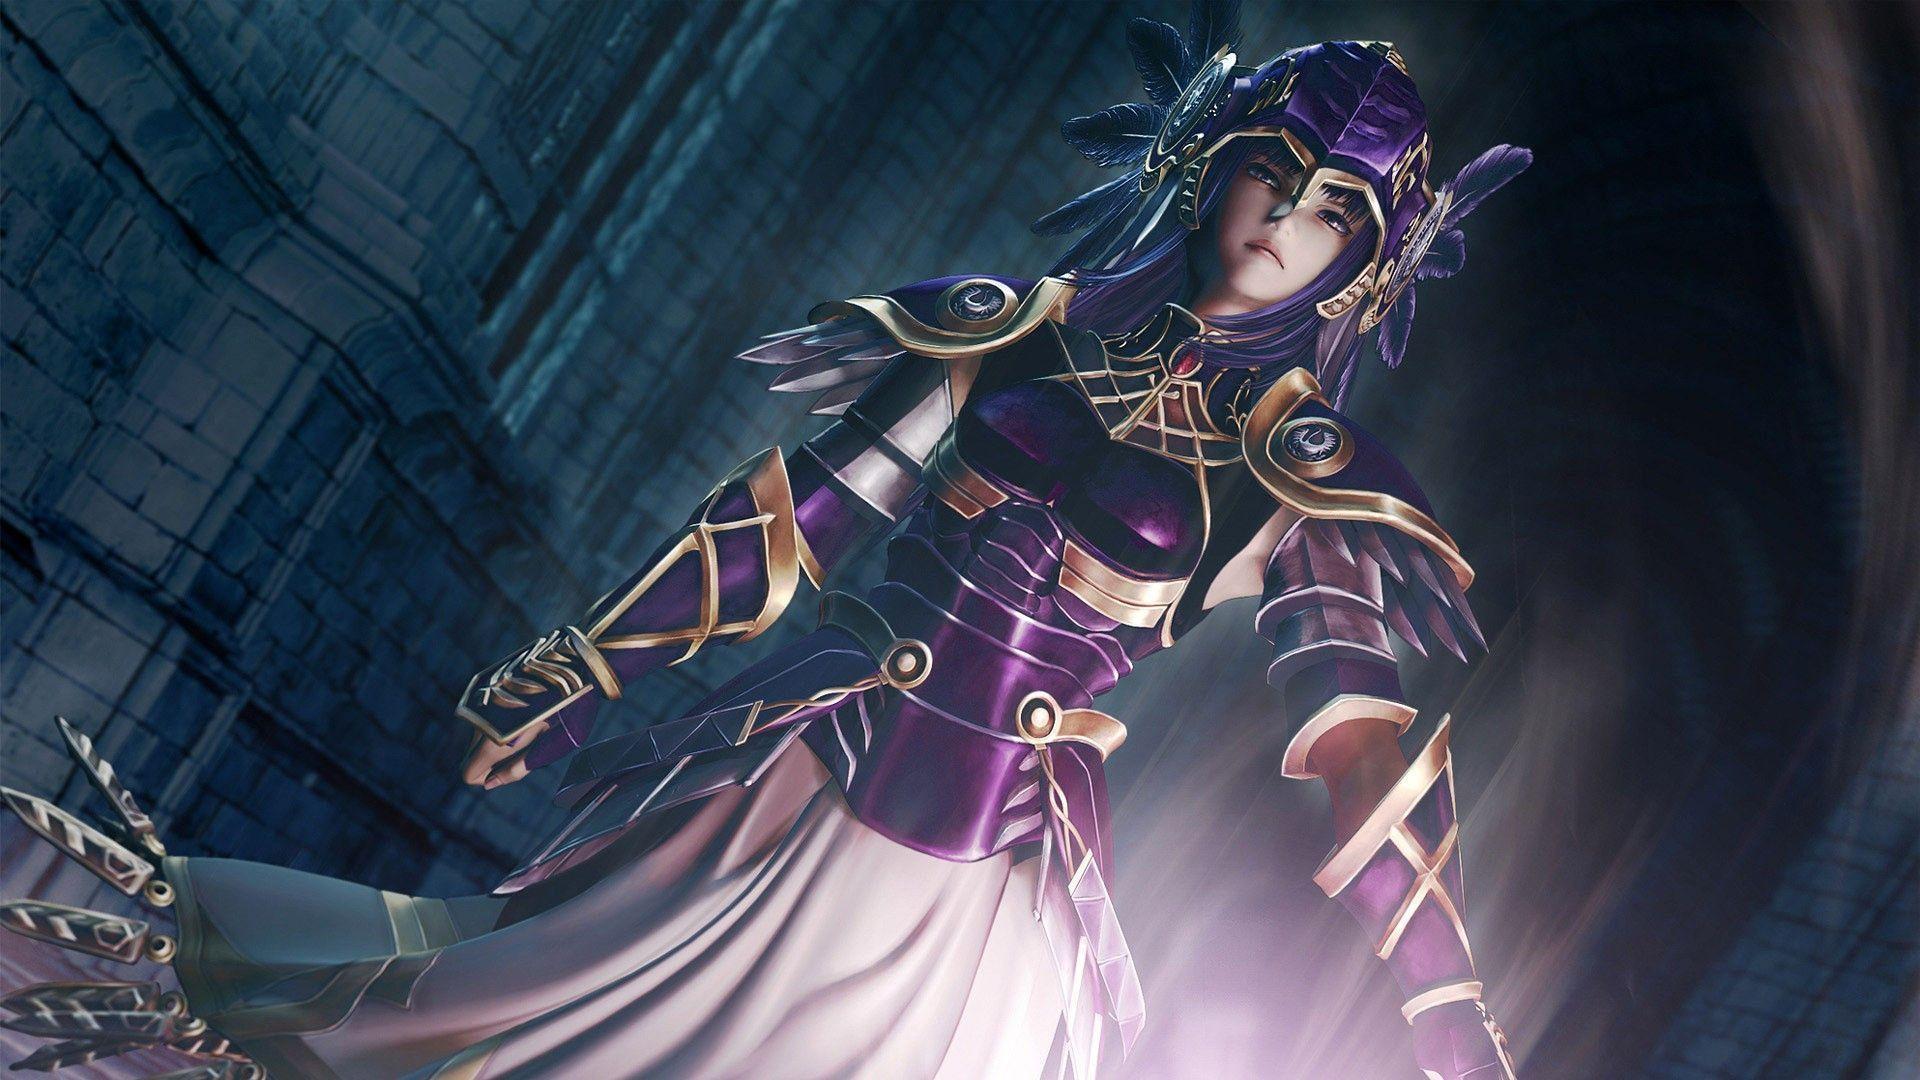 Valkyrie Profile Wallpapers - Wallpaper Cave